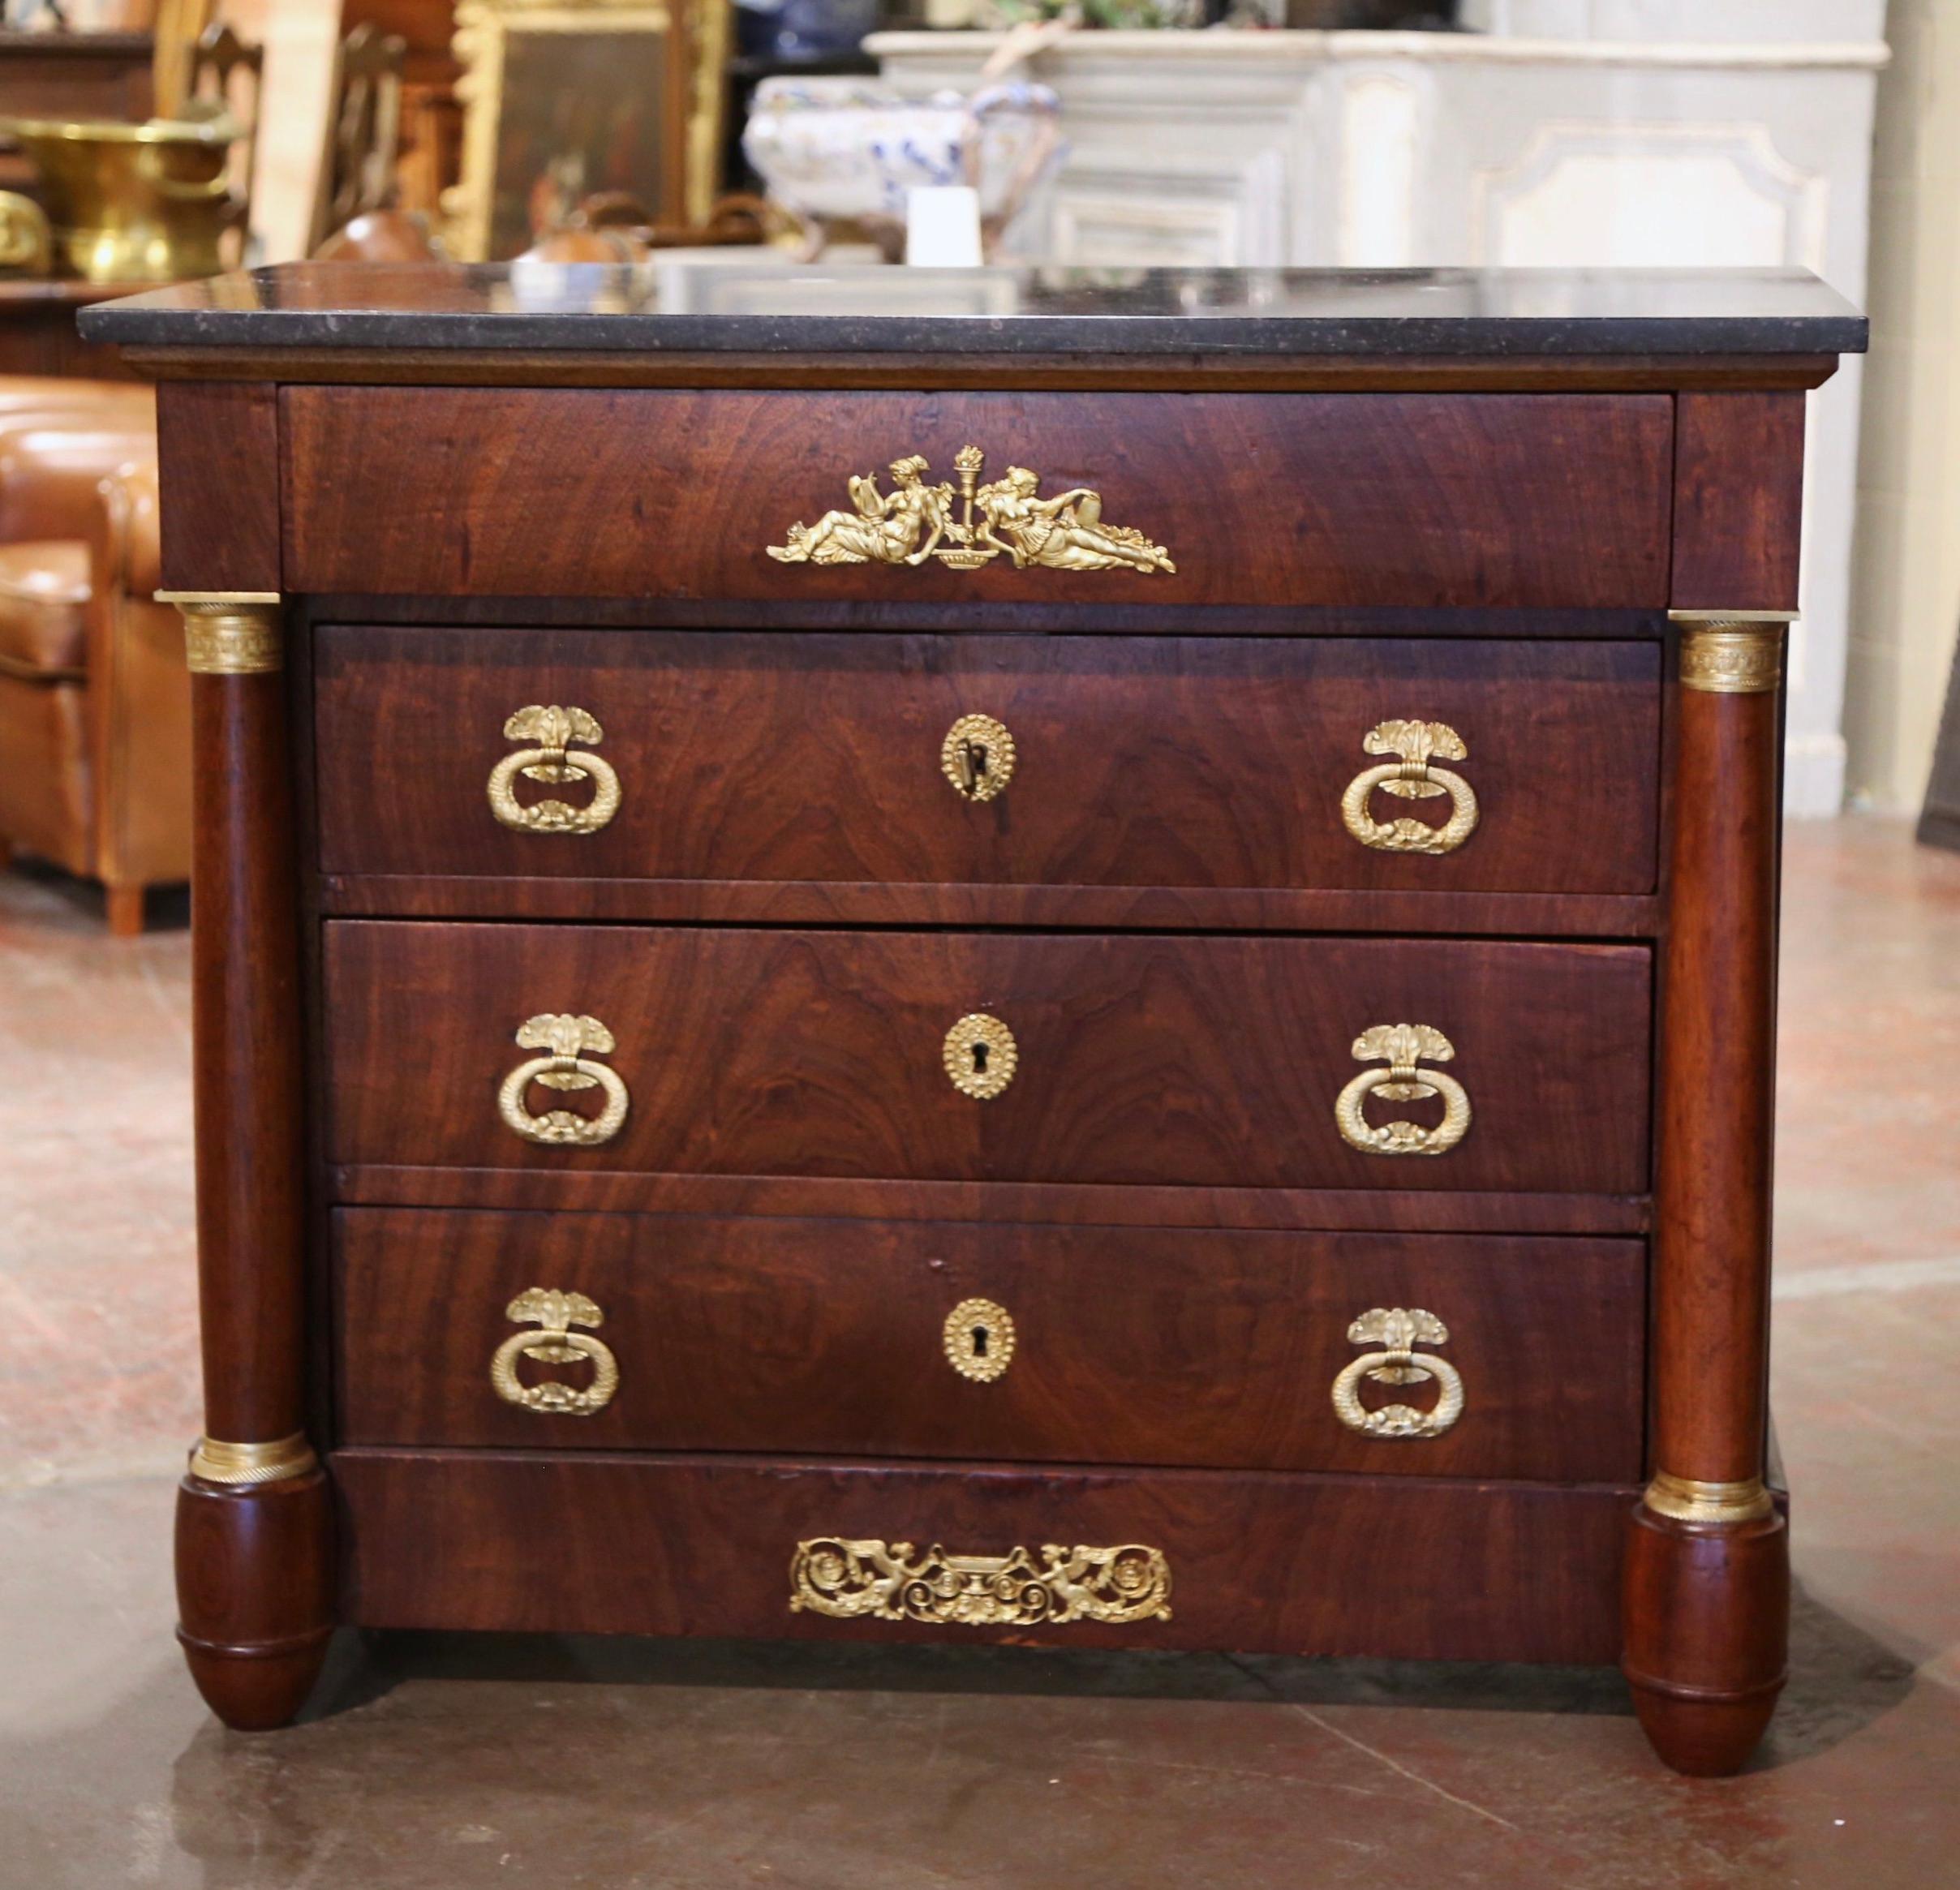 This elegant antique chest of drawers was crafted in France, circa 1860. The traditional commode sits on round columnar feet over a straight bottom plinth decorated with a brass mount, and is embellished on both sides by carved round columns with